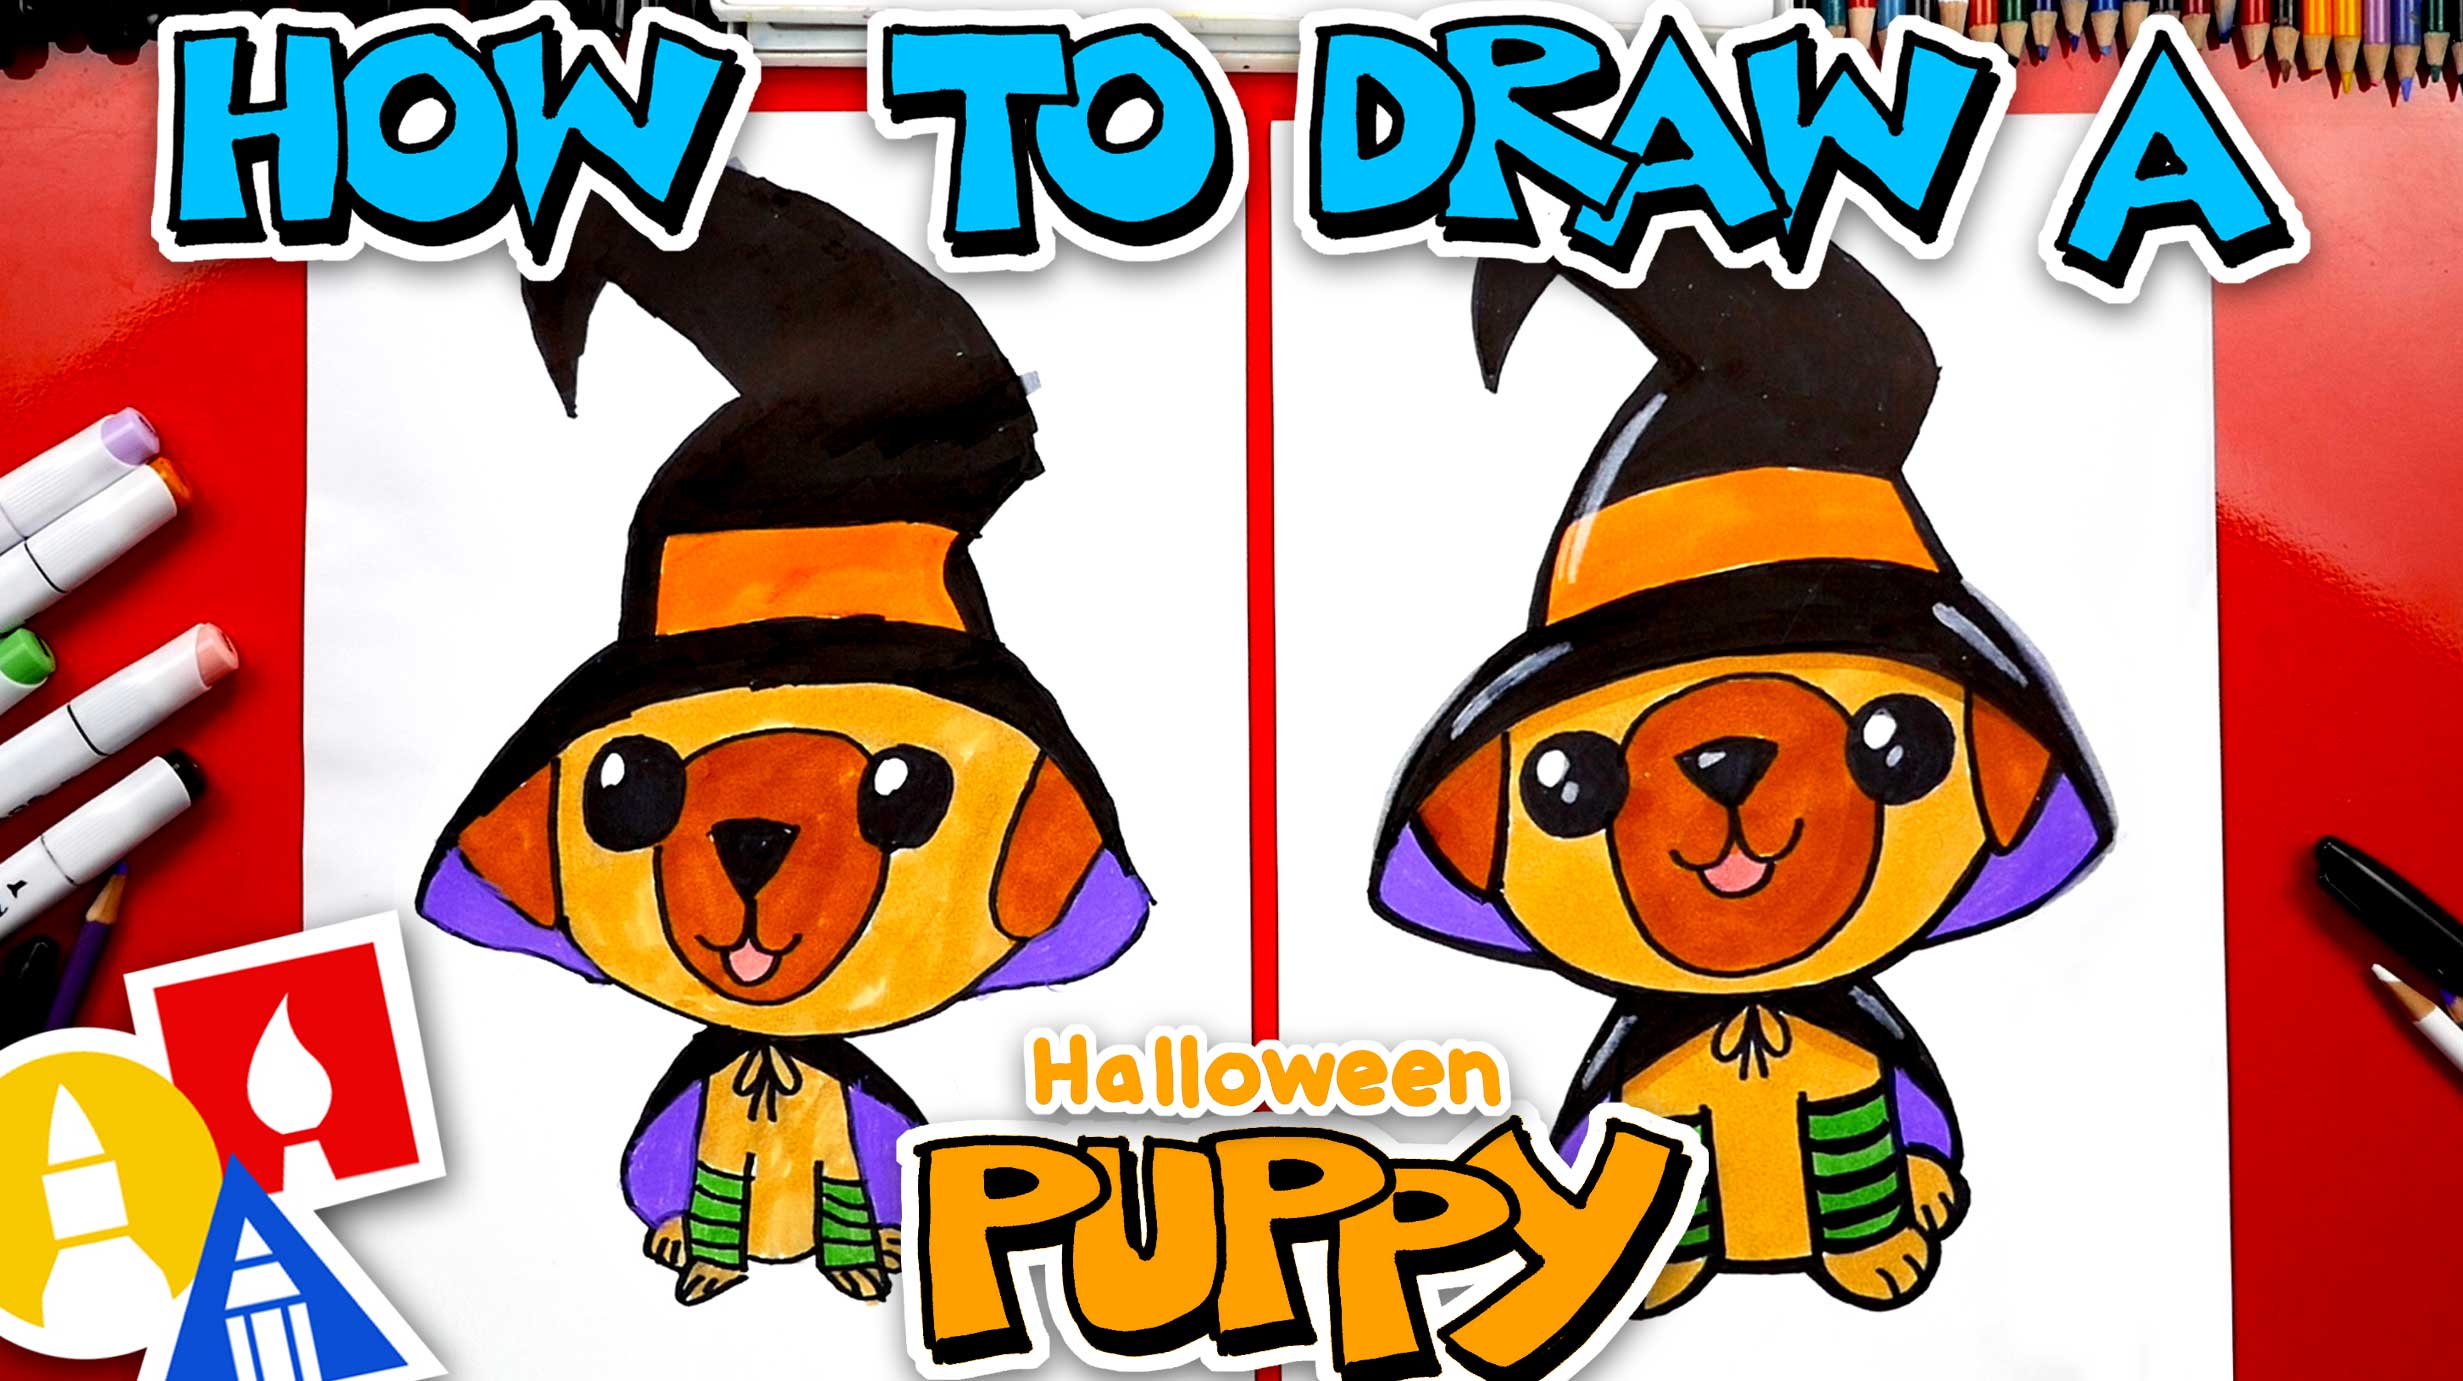 How To Draw A Halloween Puppy Witch - Art For Kids Hub How To Draw A Halloween Puppy